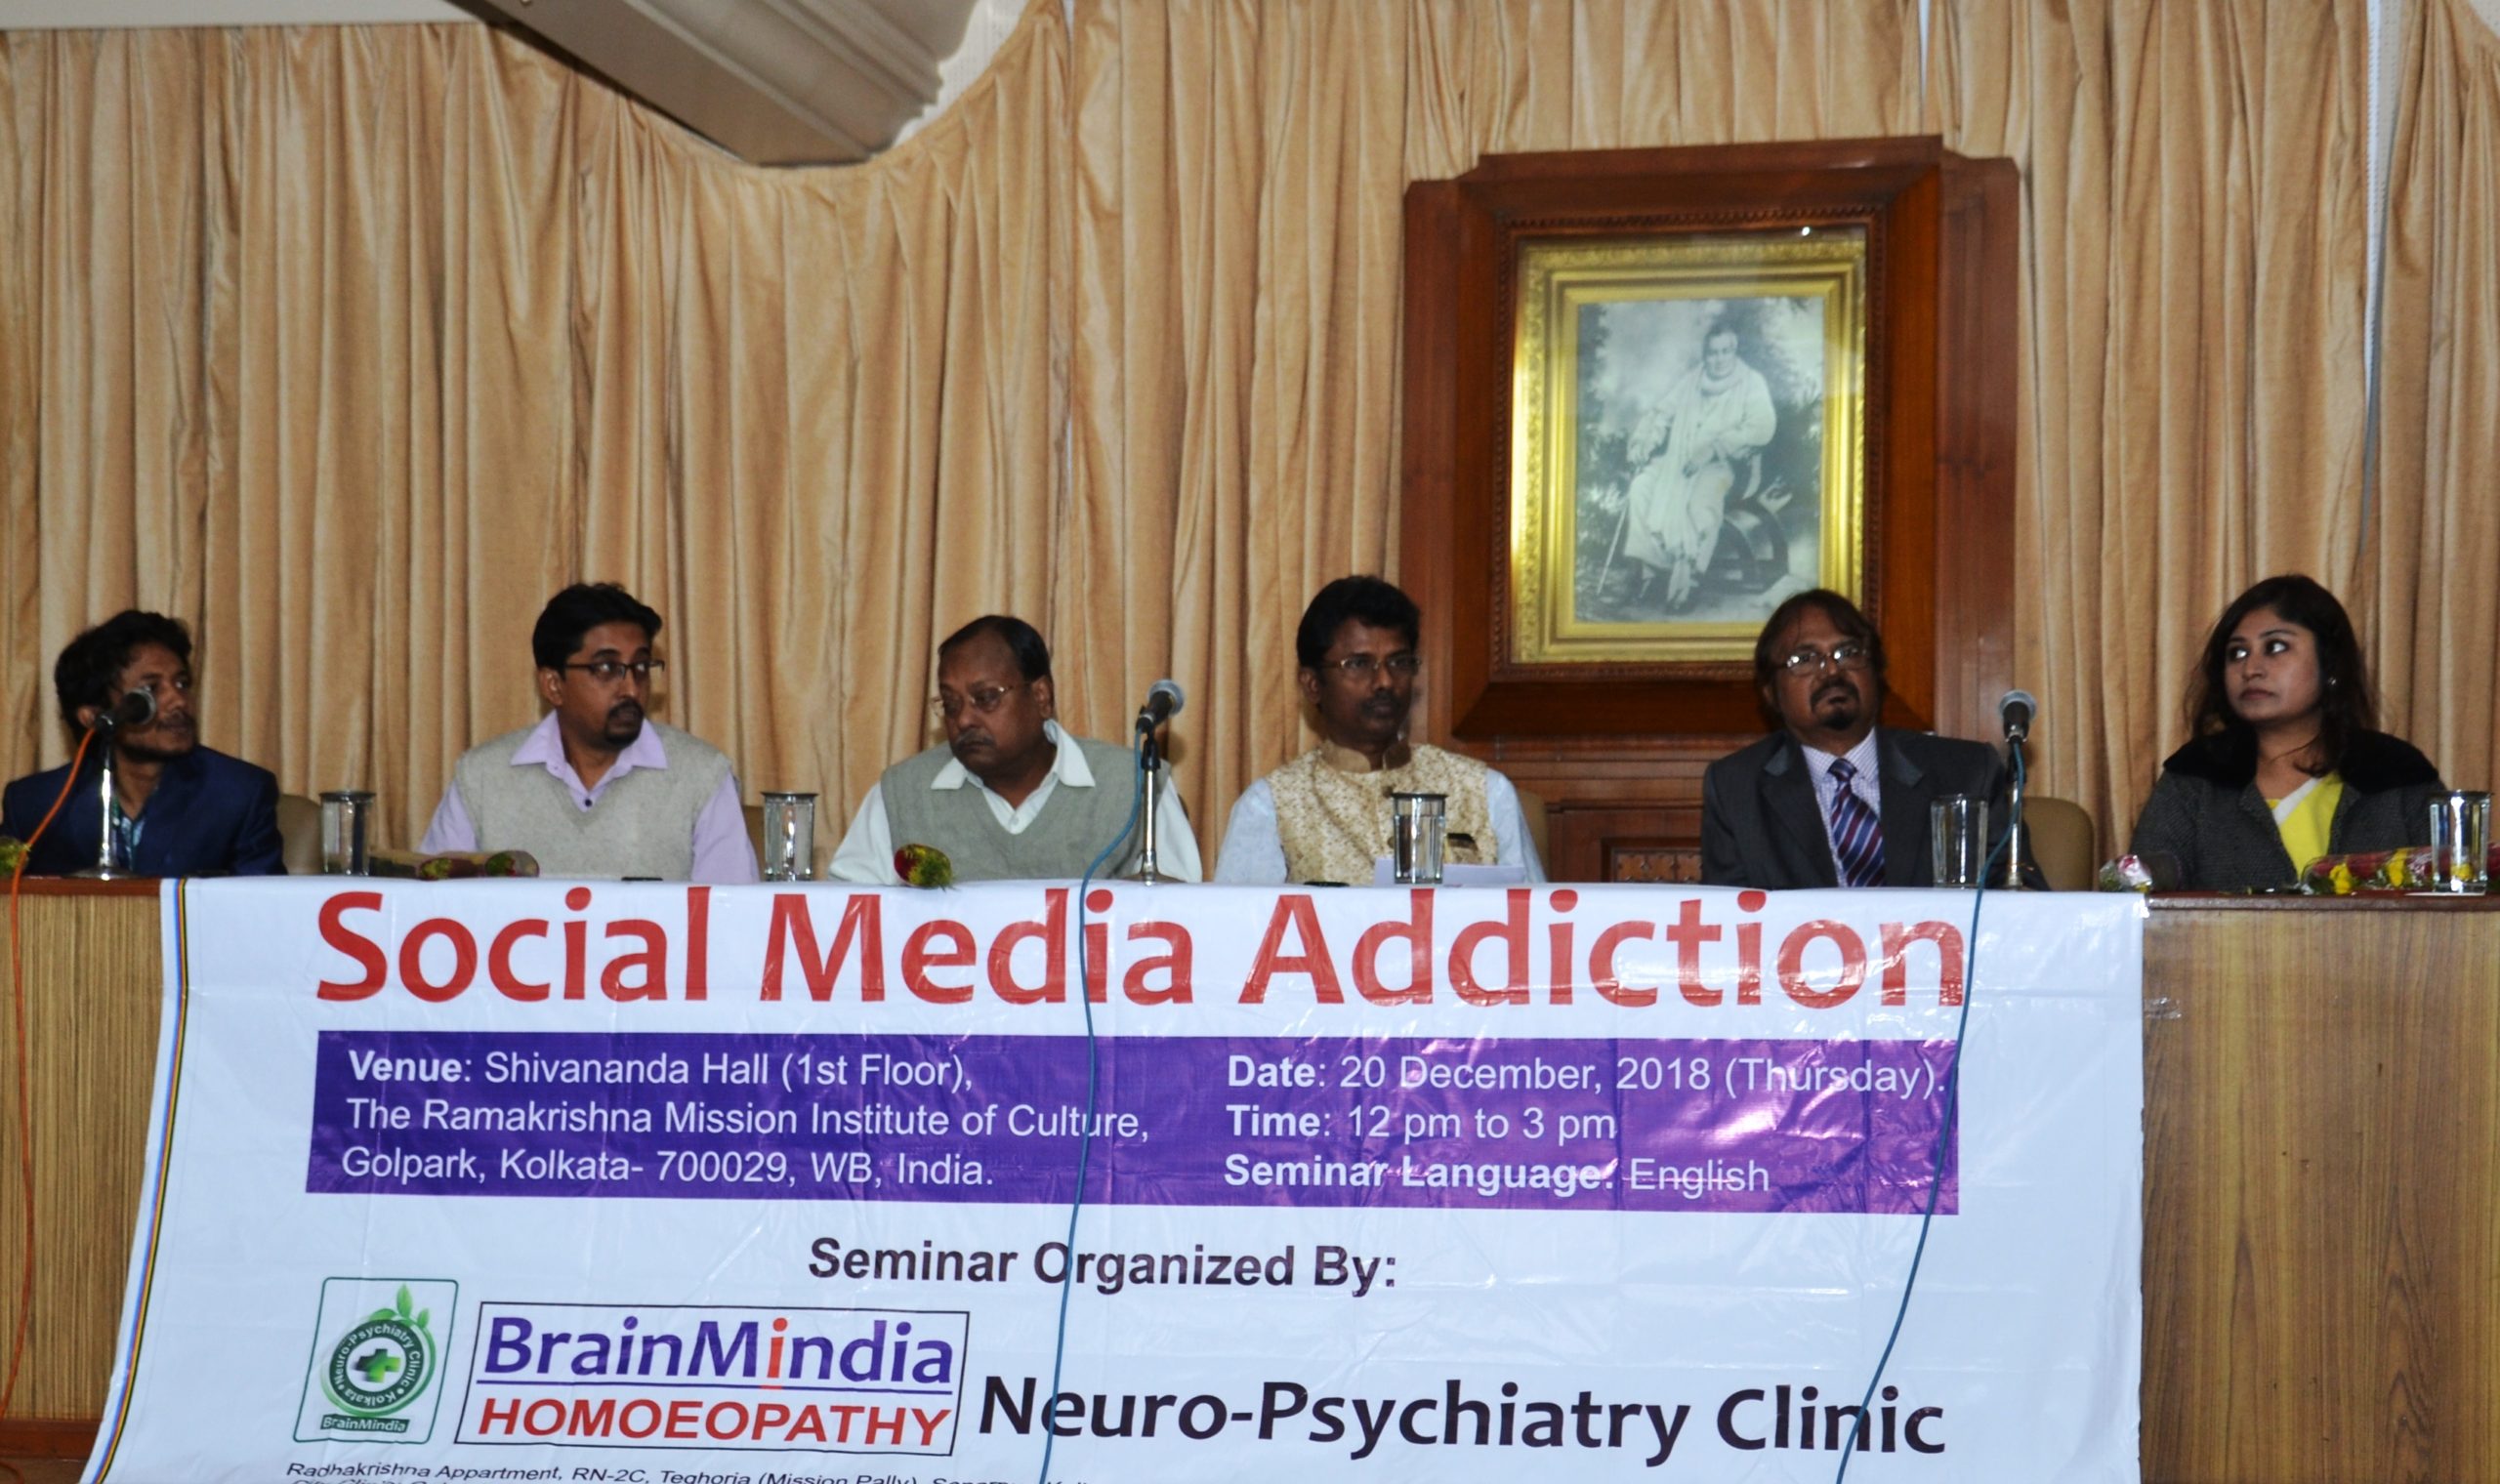 Pictures from Seminar on “Social Media Addiction” Organized by BrainMindia Homeopathy Neuro-Psychiatry Clinic